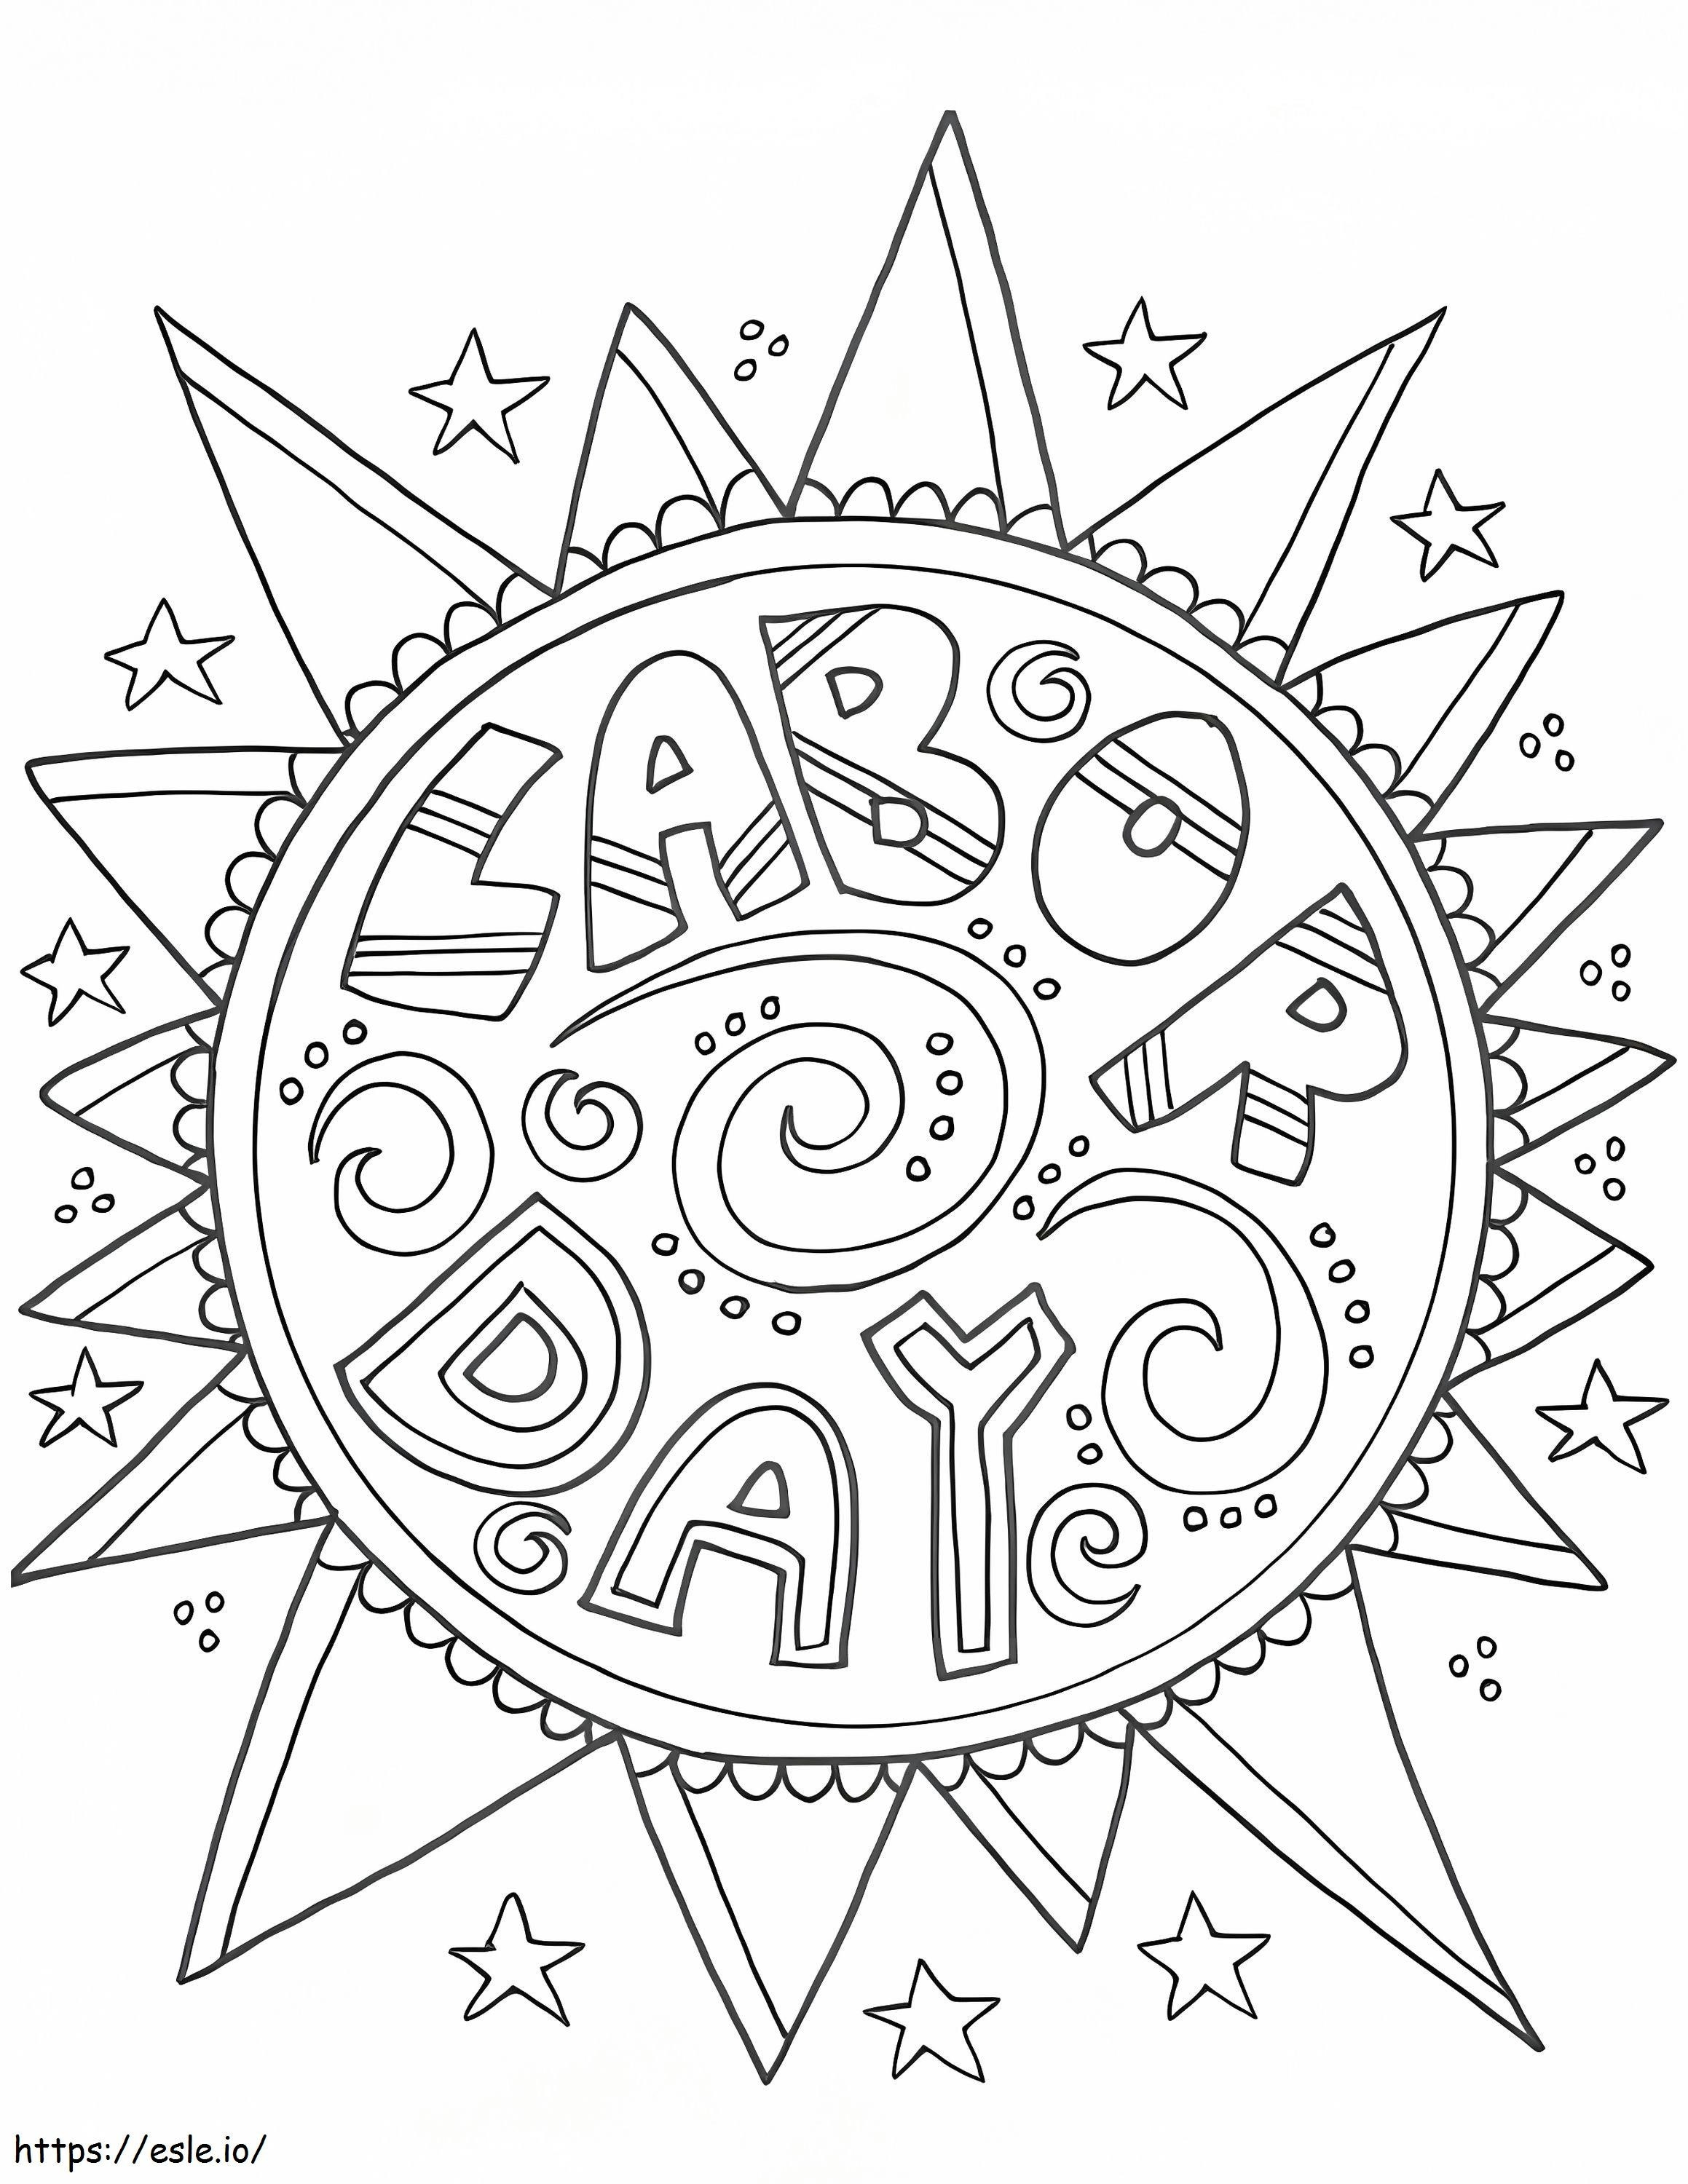 Labor Day 10 coloring page